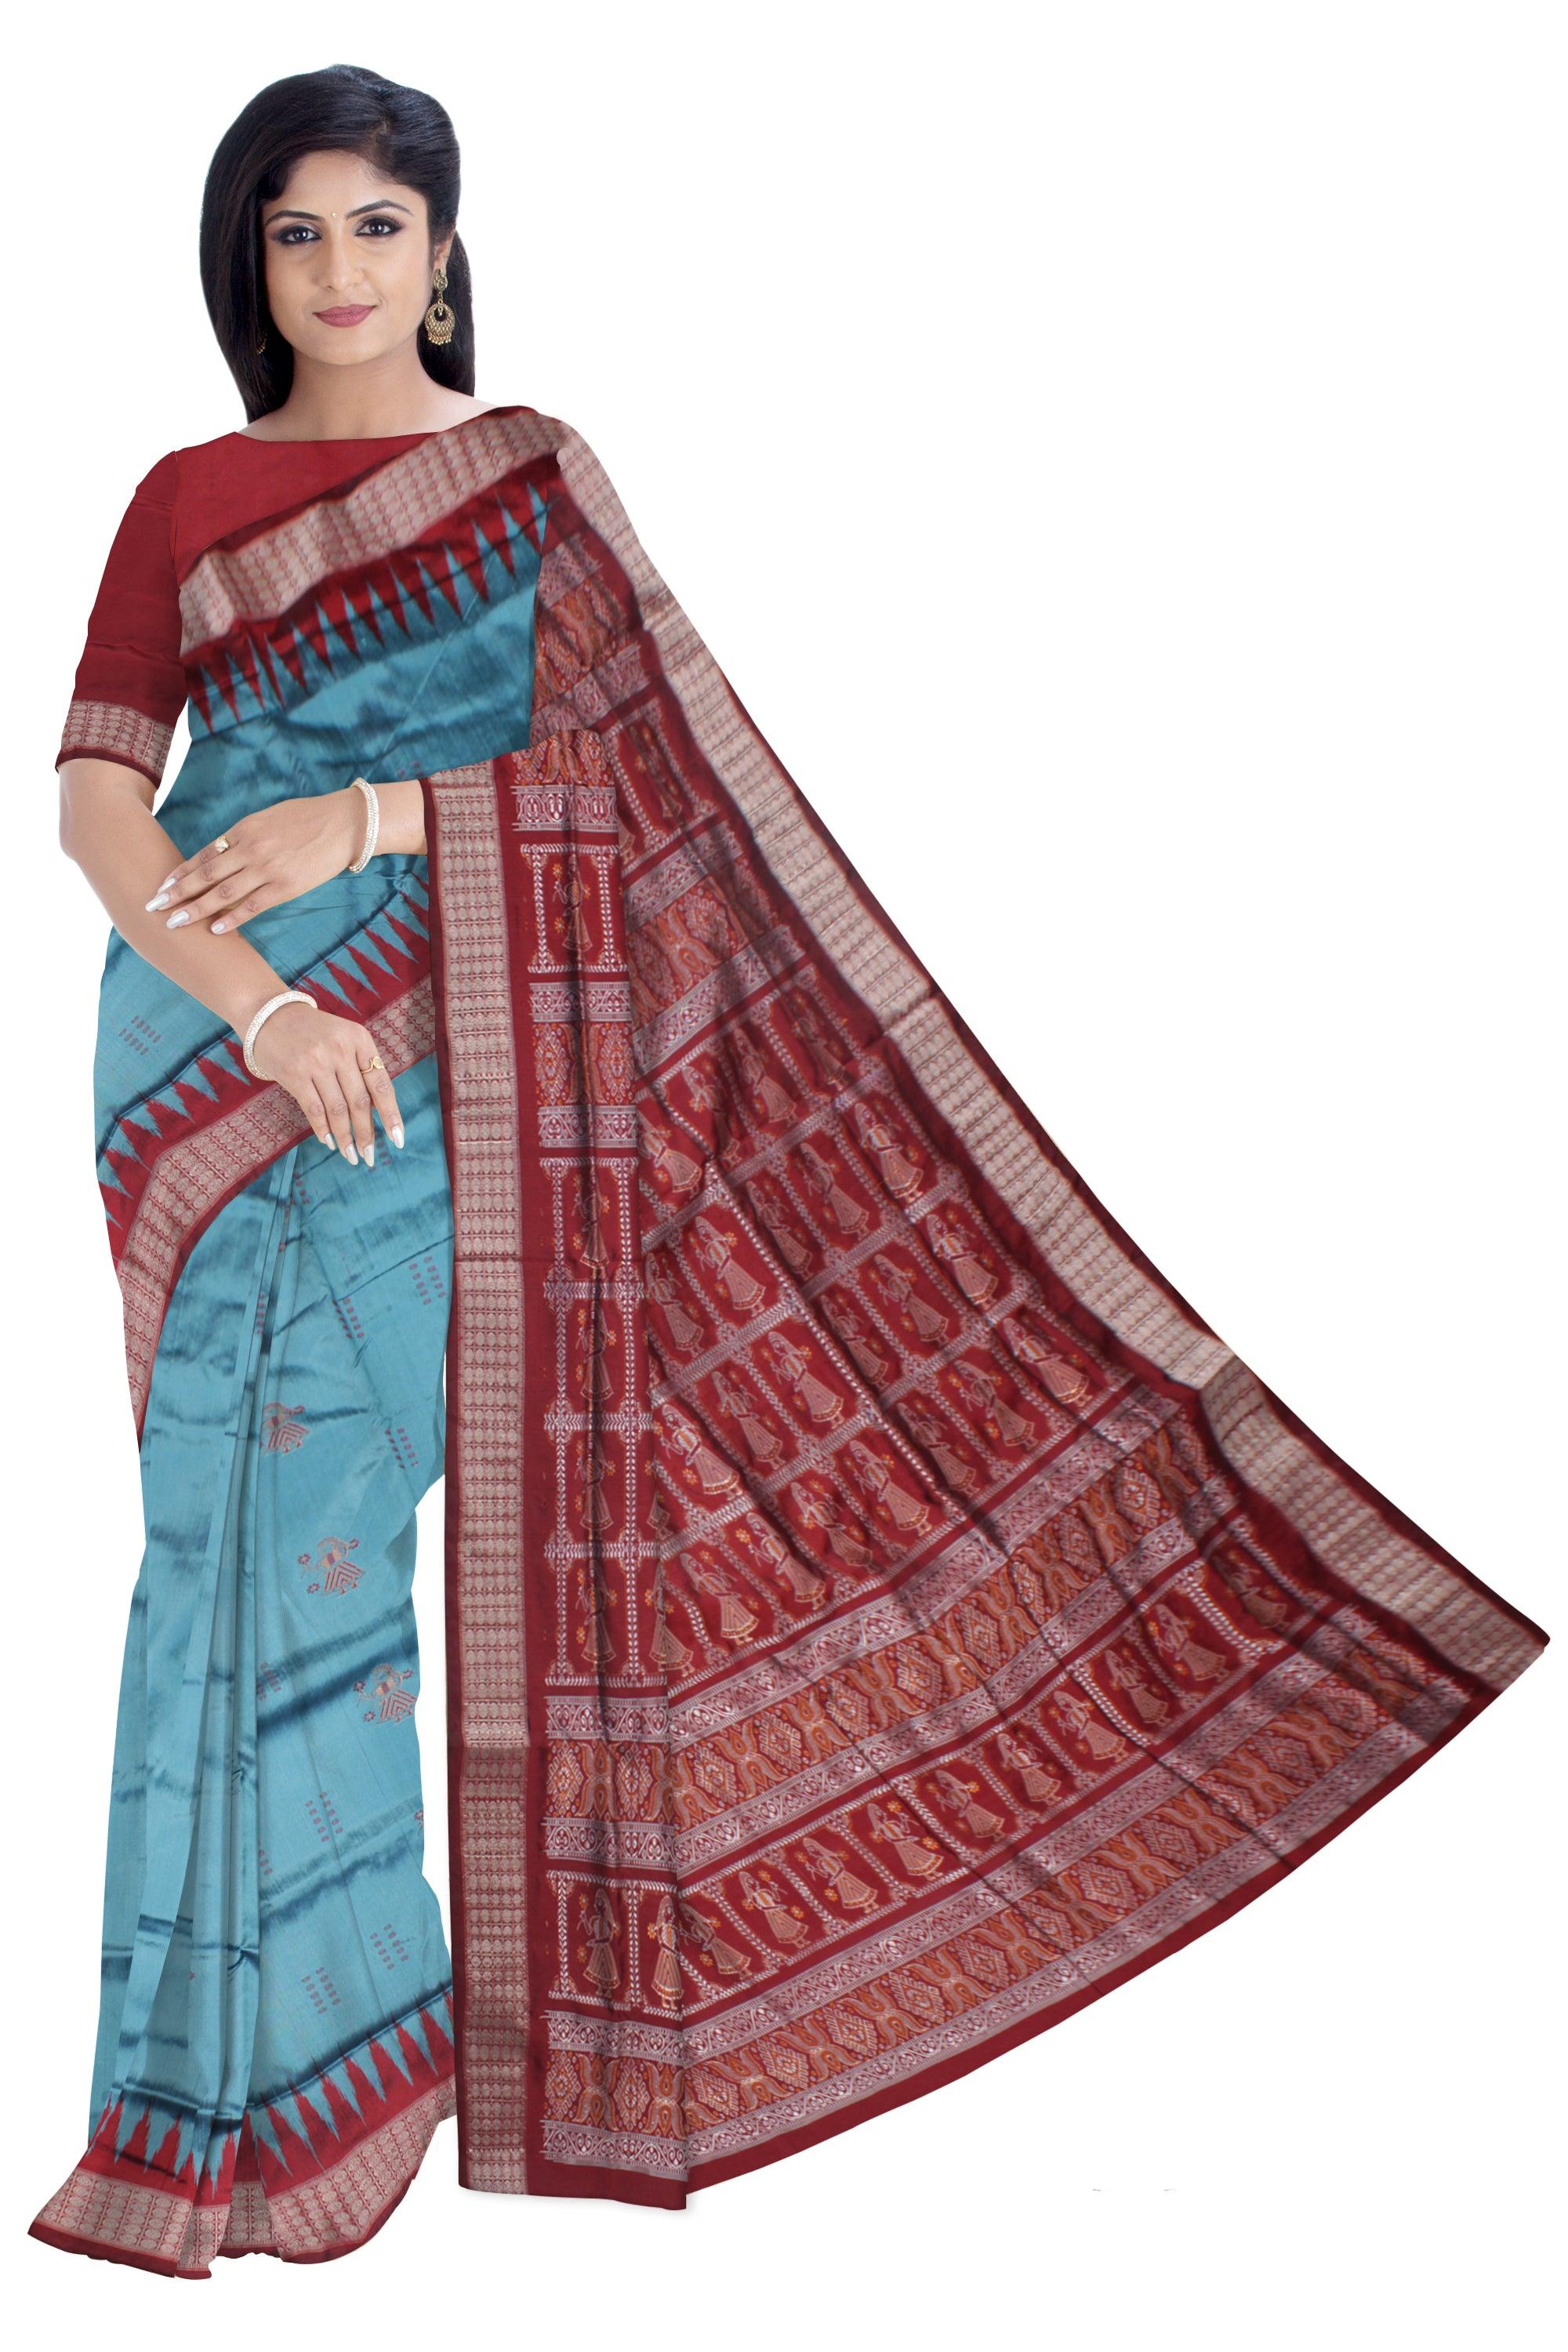 DOLL PRINT PATA SAREE IS SKY AND MAROON COLOR BASE, COMES WITH MATCHING BLOUSE PIECE. - Koshali Arts & Crafts Enterprise